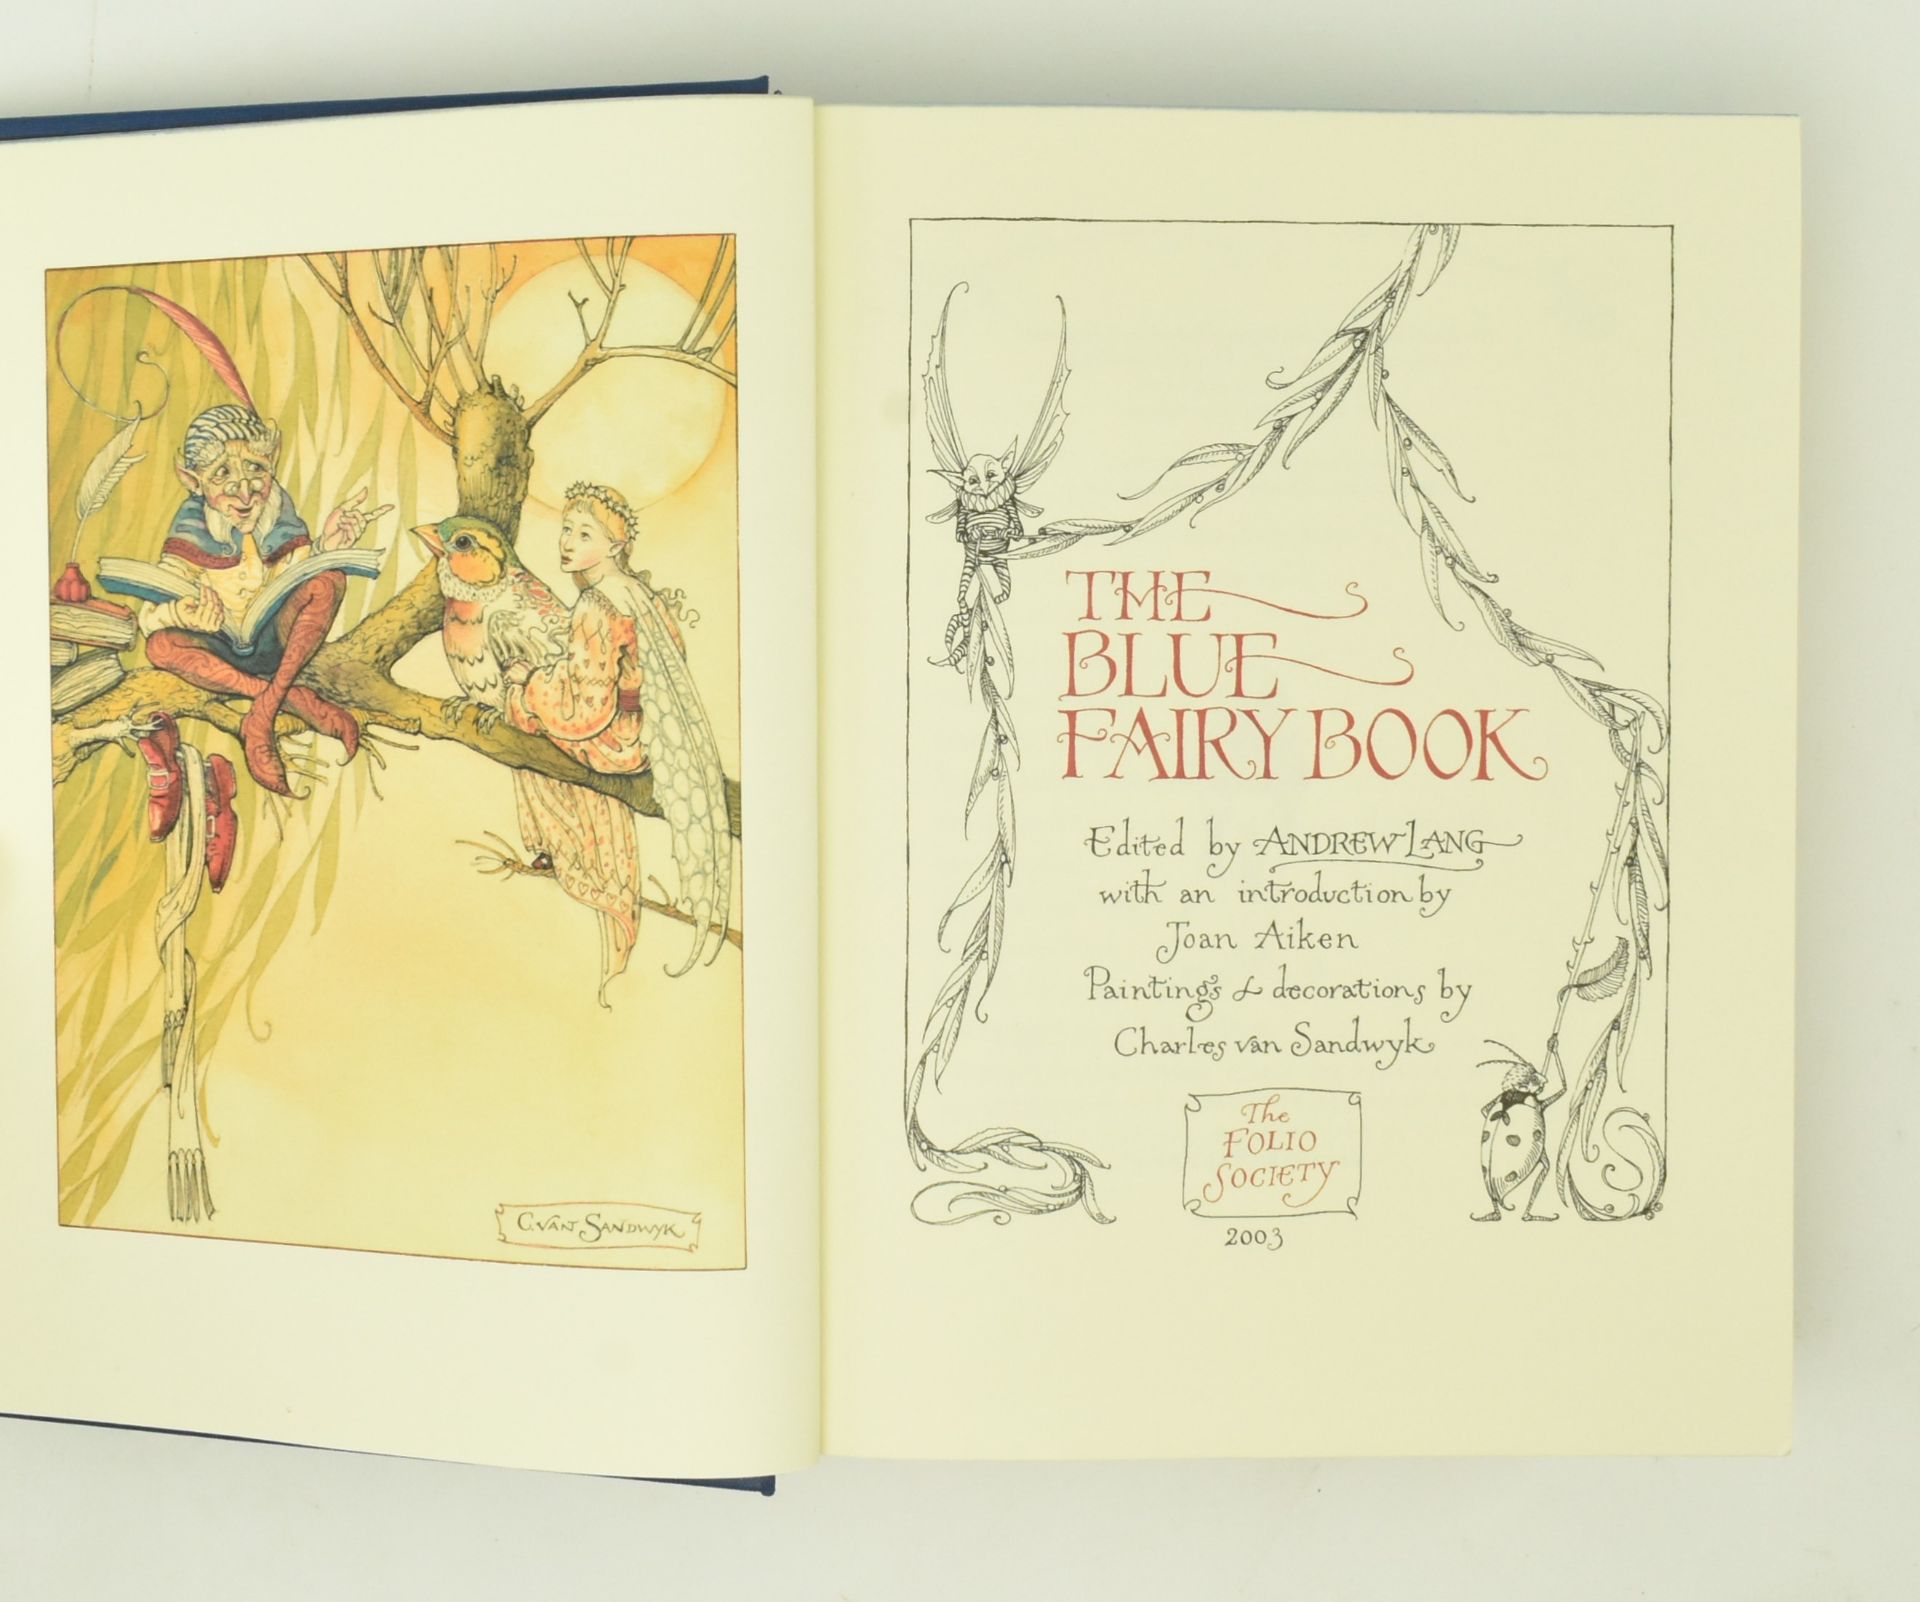 FOLIO SOCIETY. ANDREW LANG'S BLUE FAIRY BOOK FIRST PRINTING - Image 3 of 6